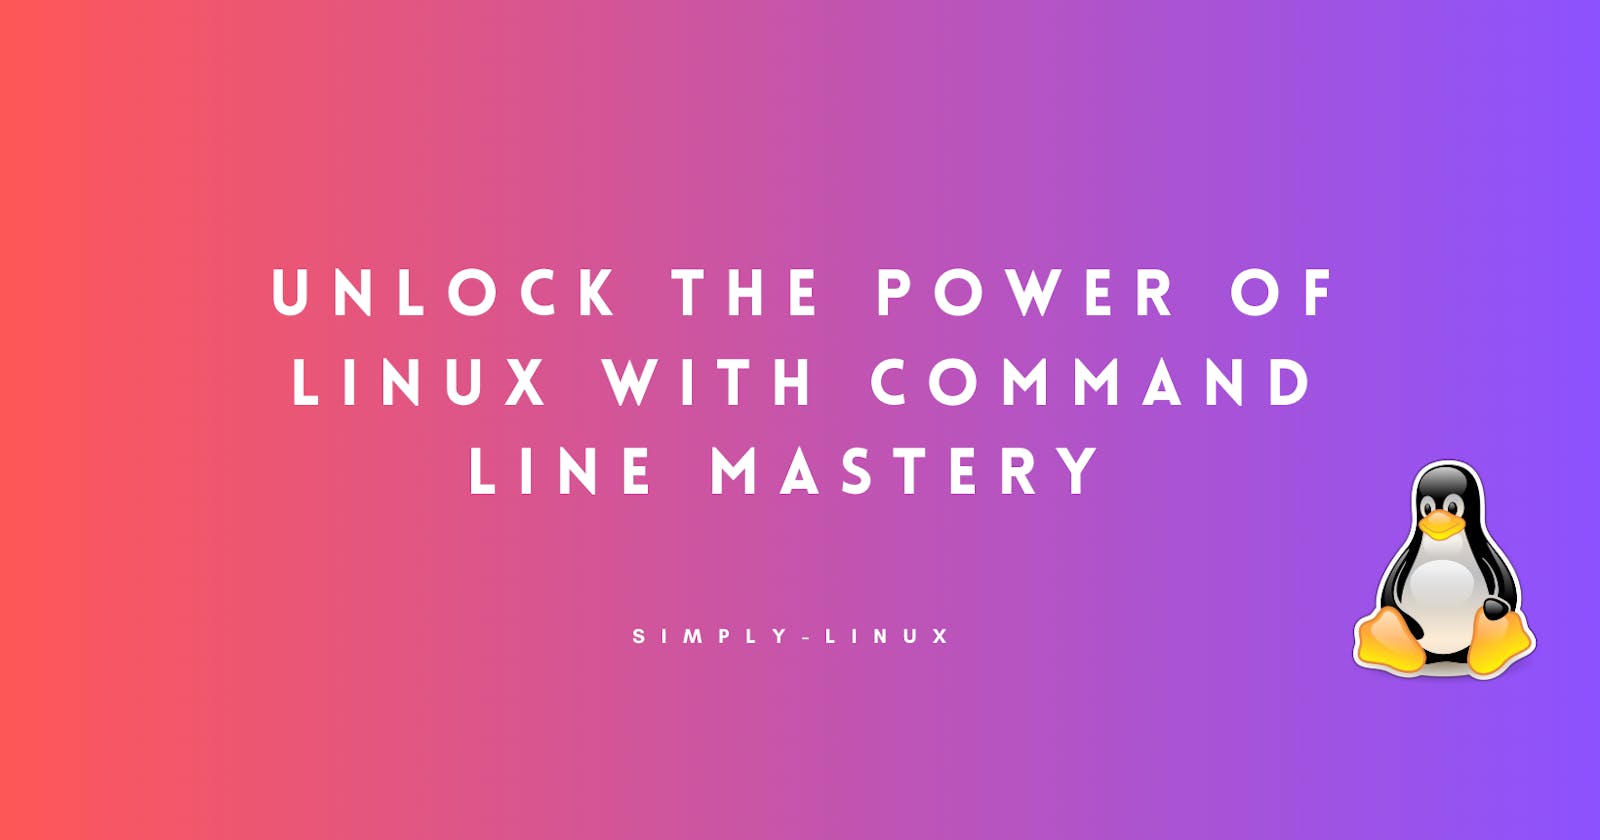 Unlock the Power of Linux with Command Line Mastery